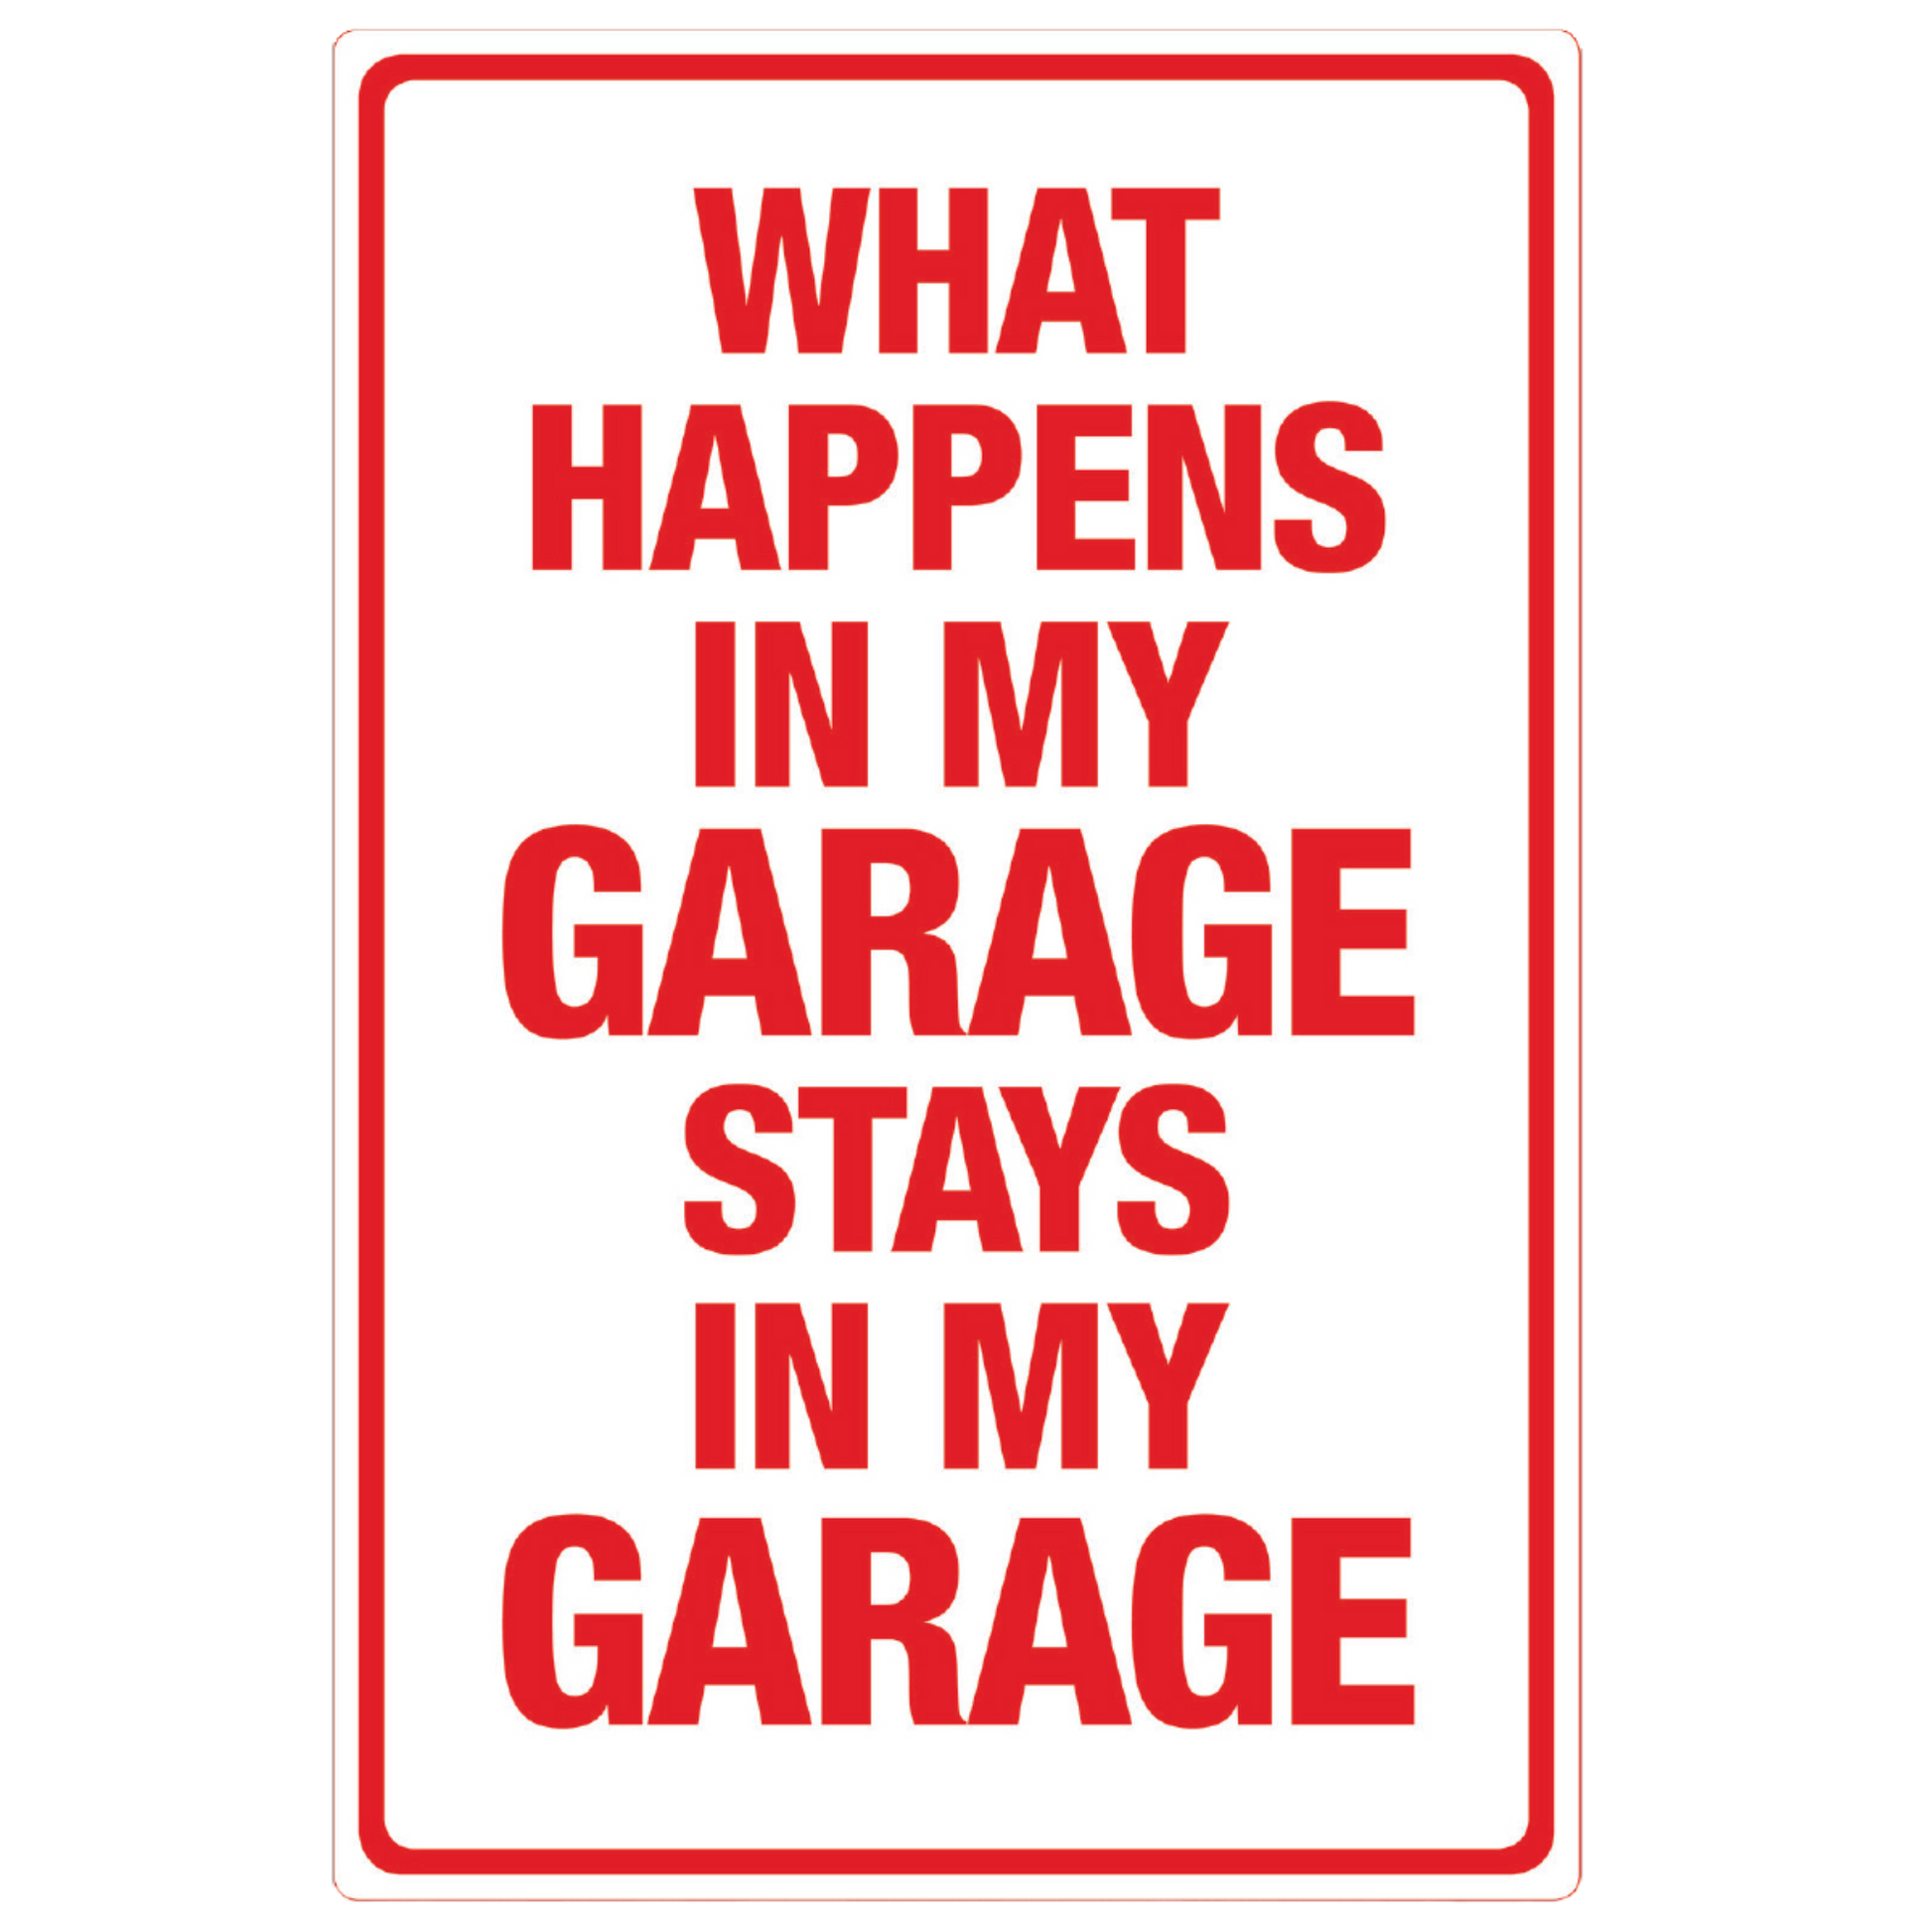 Red and white tin sign stating "What Happens in My Garage Stays in My Garage," a playful declaration for privacy and fun in personal workshop spaces.